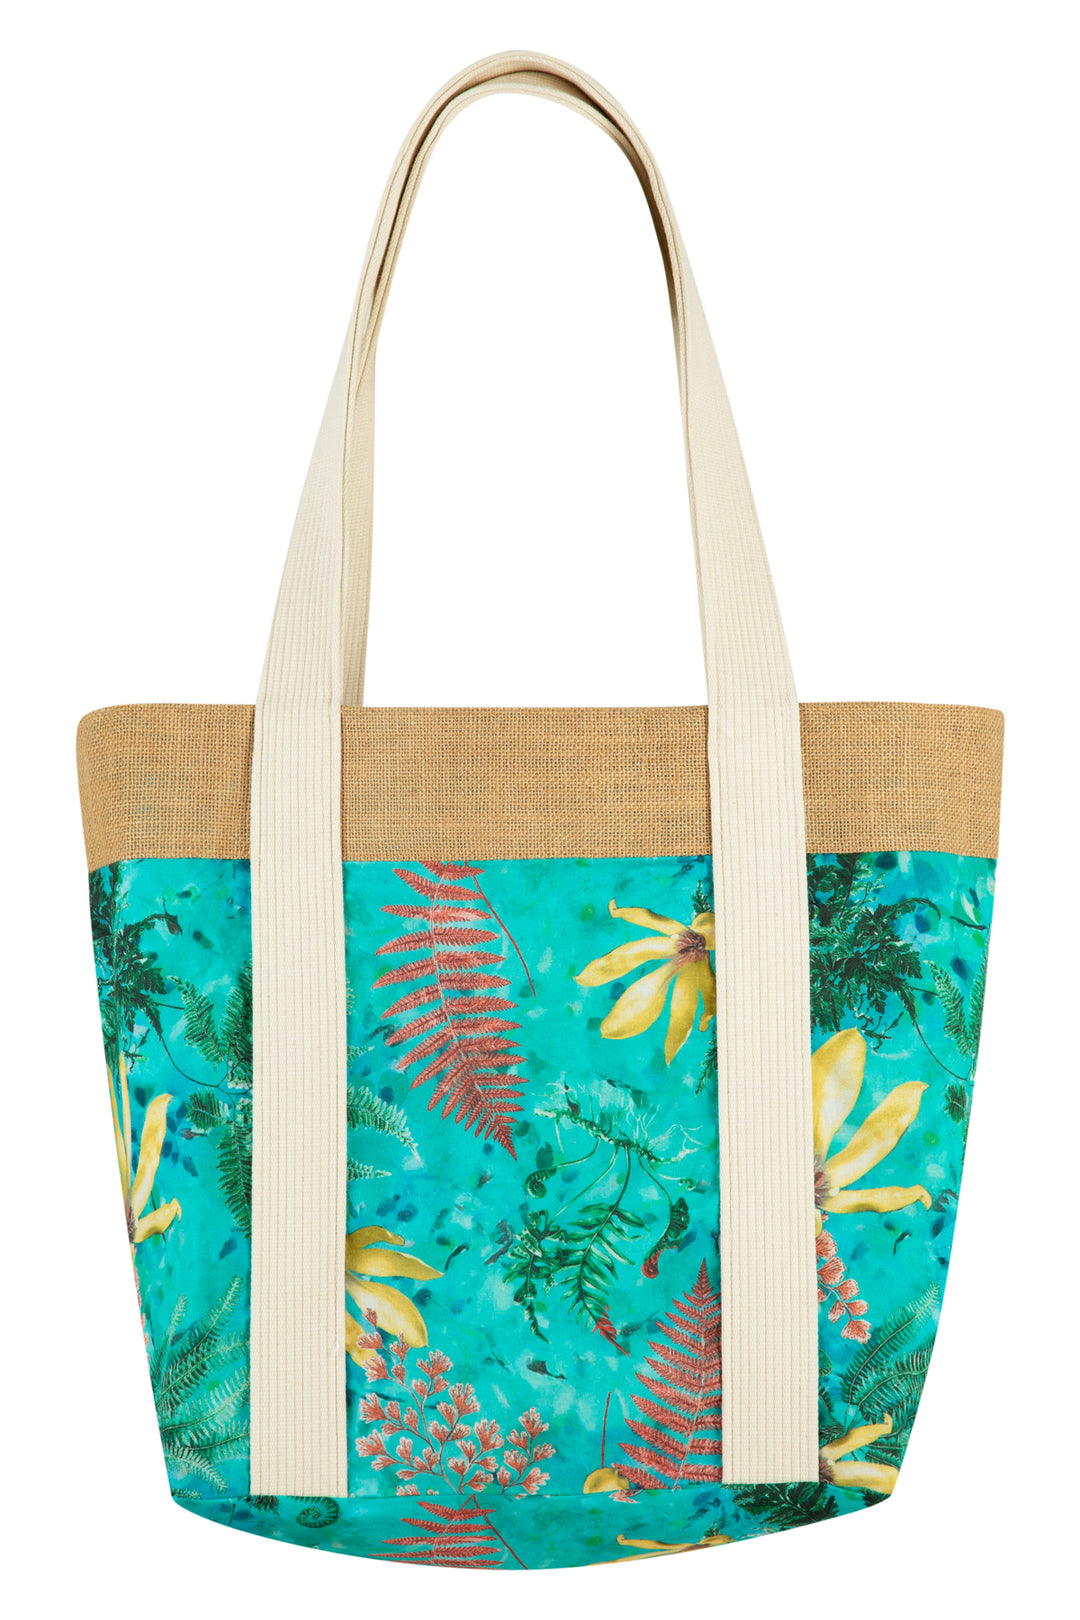 Tote-ally Summer Tote Bag - Vintage Curate (by Trelise Cooper) Bags Coop   